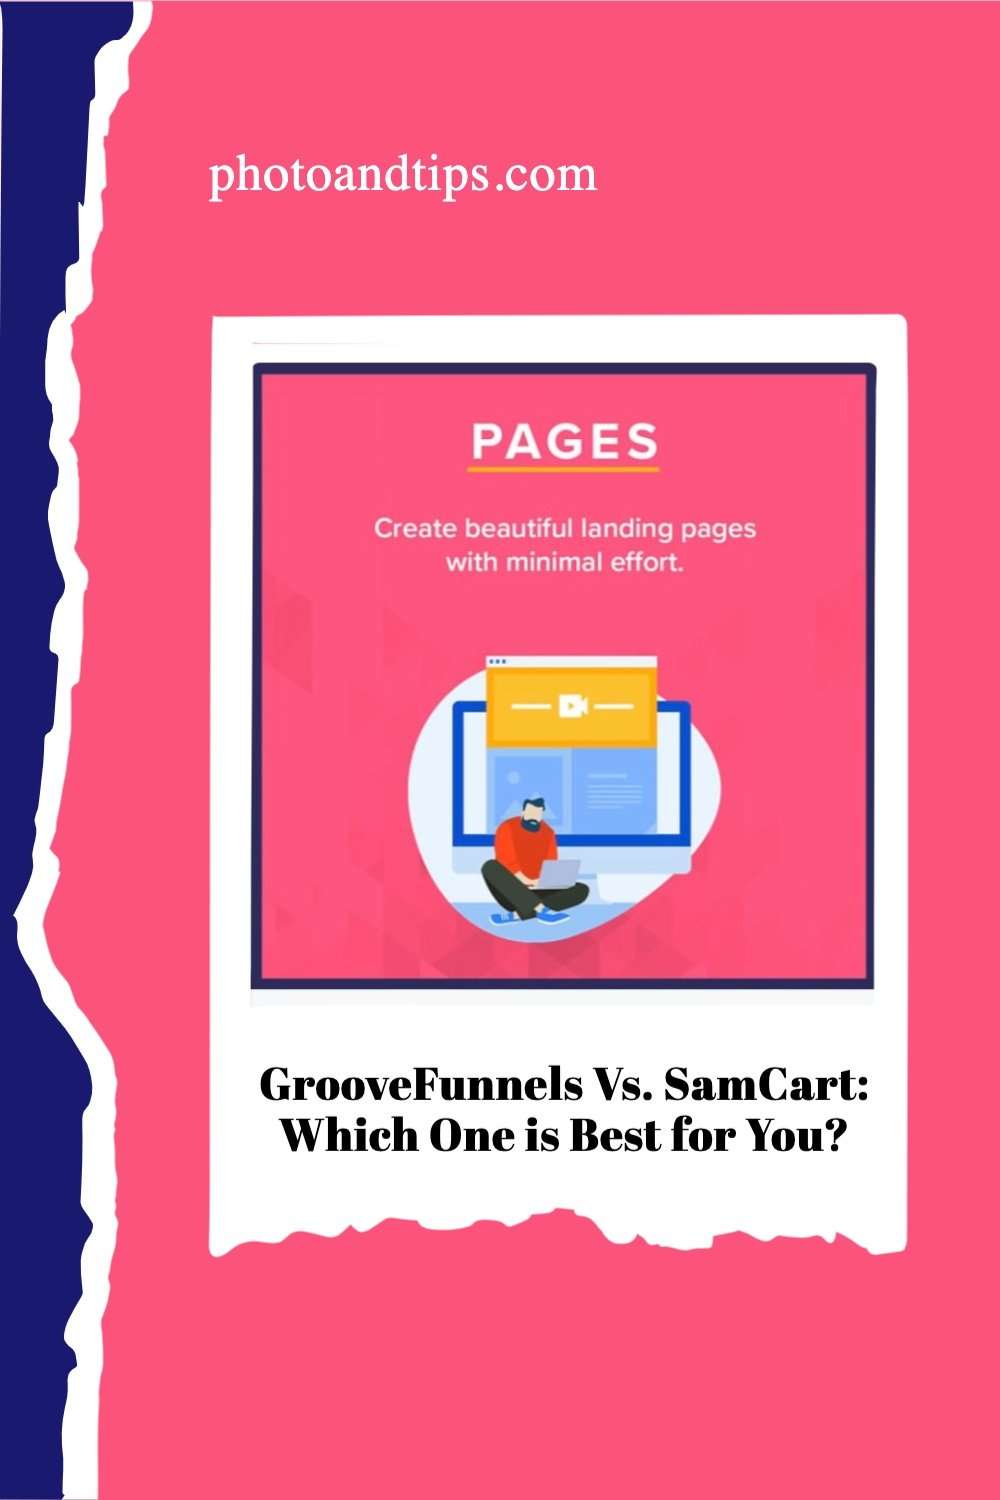 GrooveFunnels Vs. SamCart - Which One is Best for You